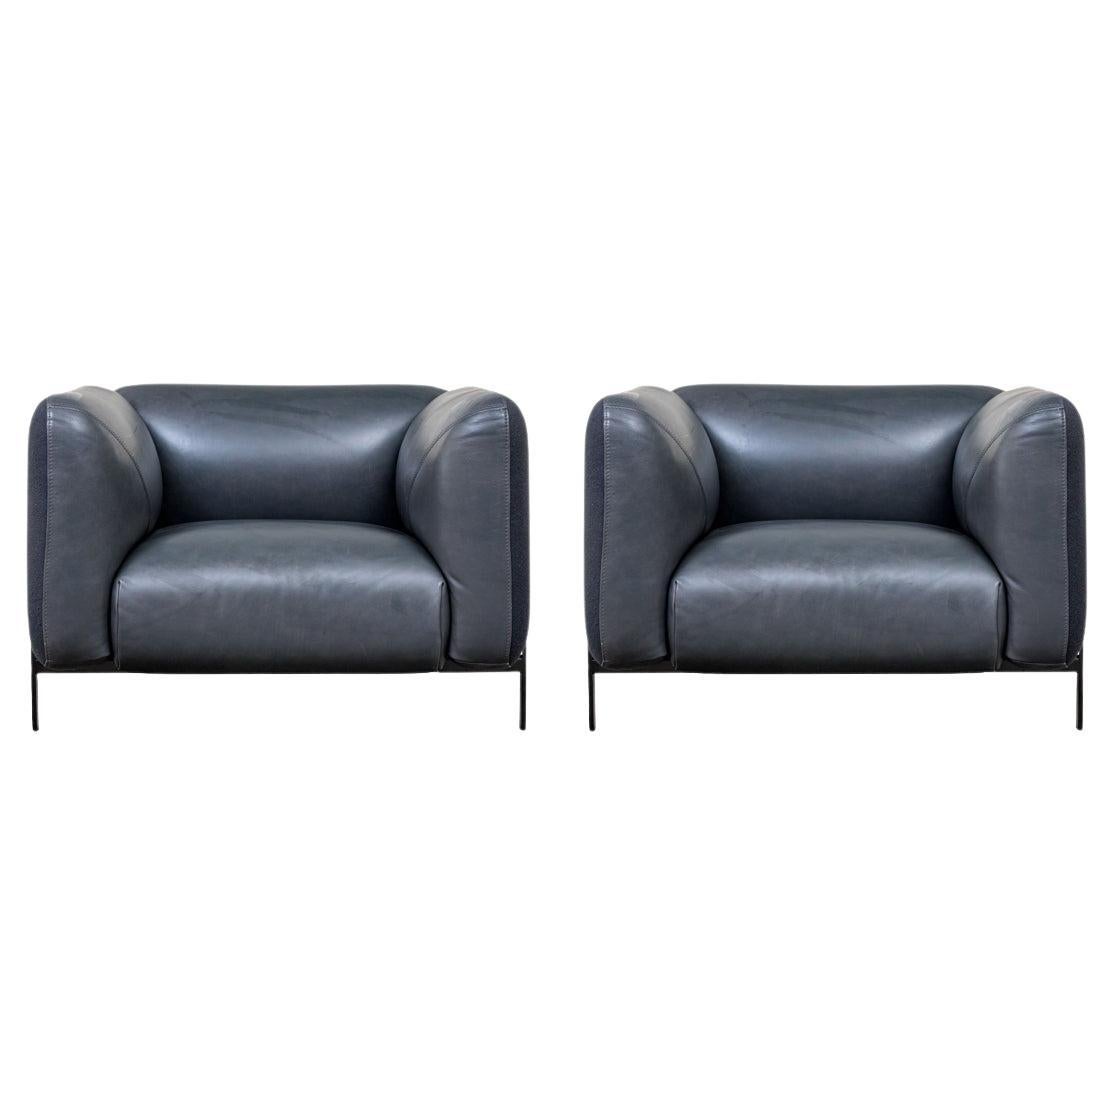 Pair Of Roche Bobois Leather Lobby Club Chairs By Cedric Ragot For Sale